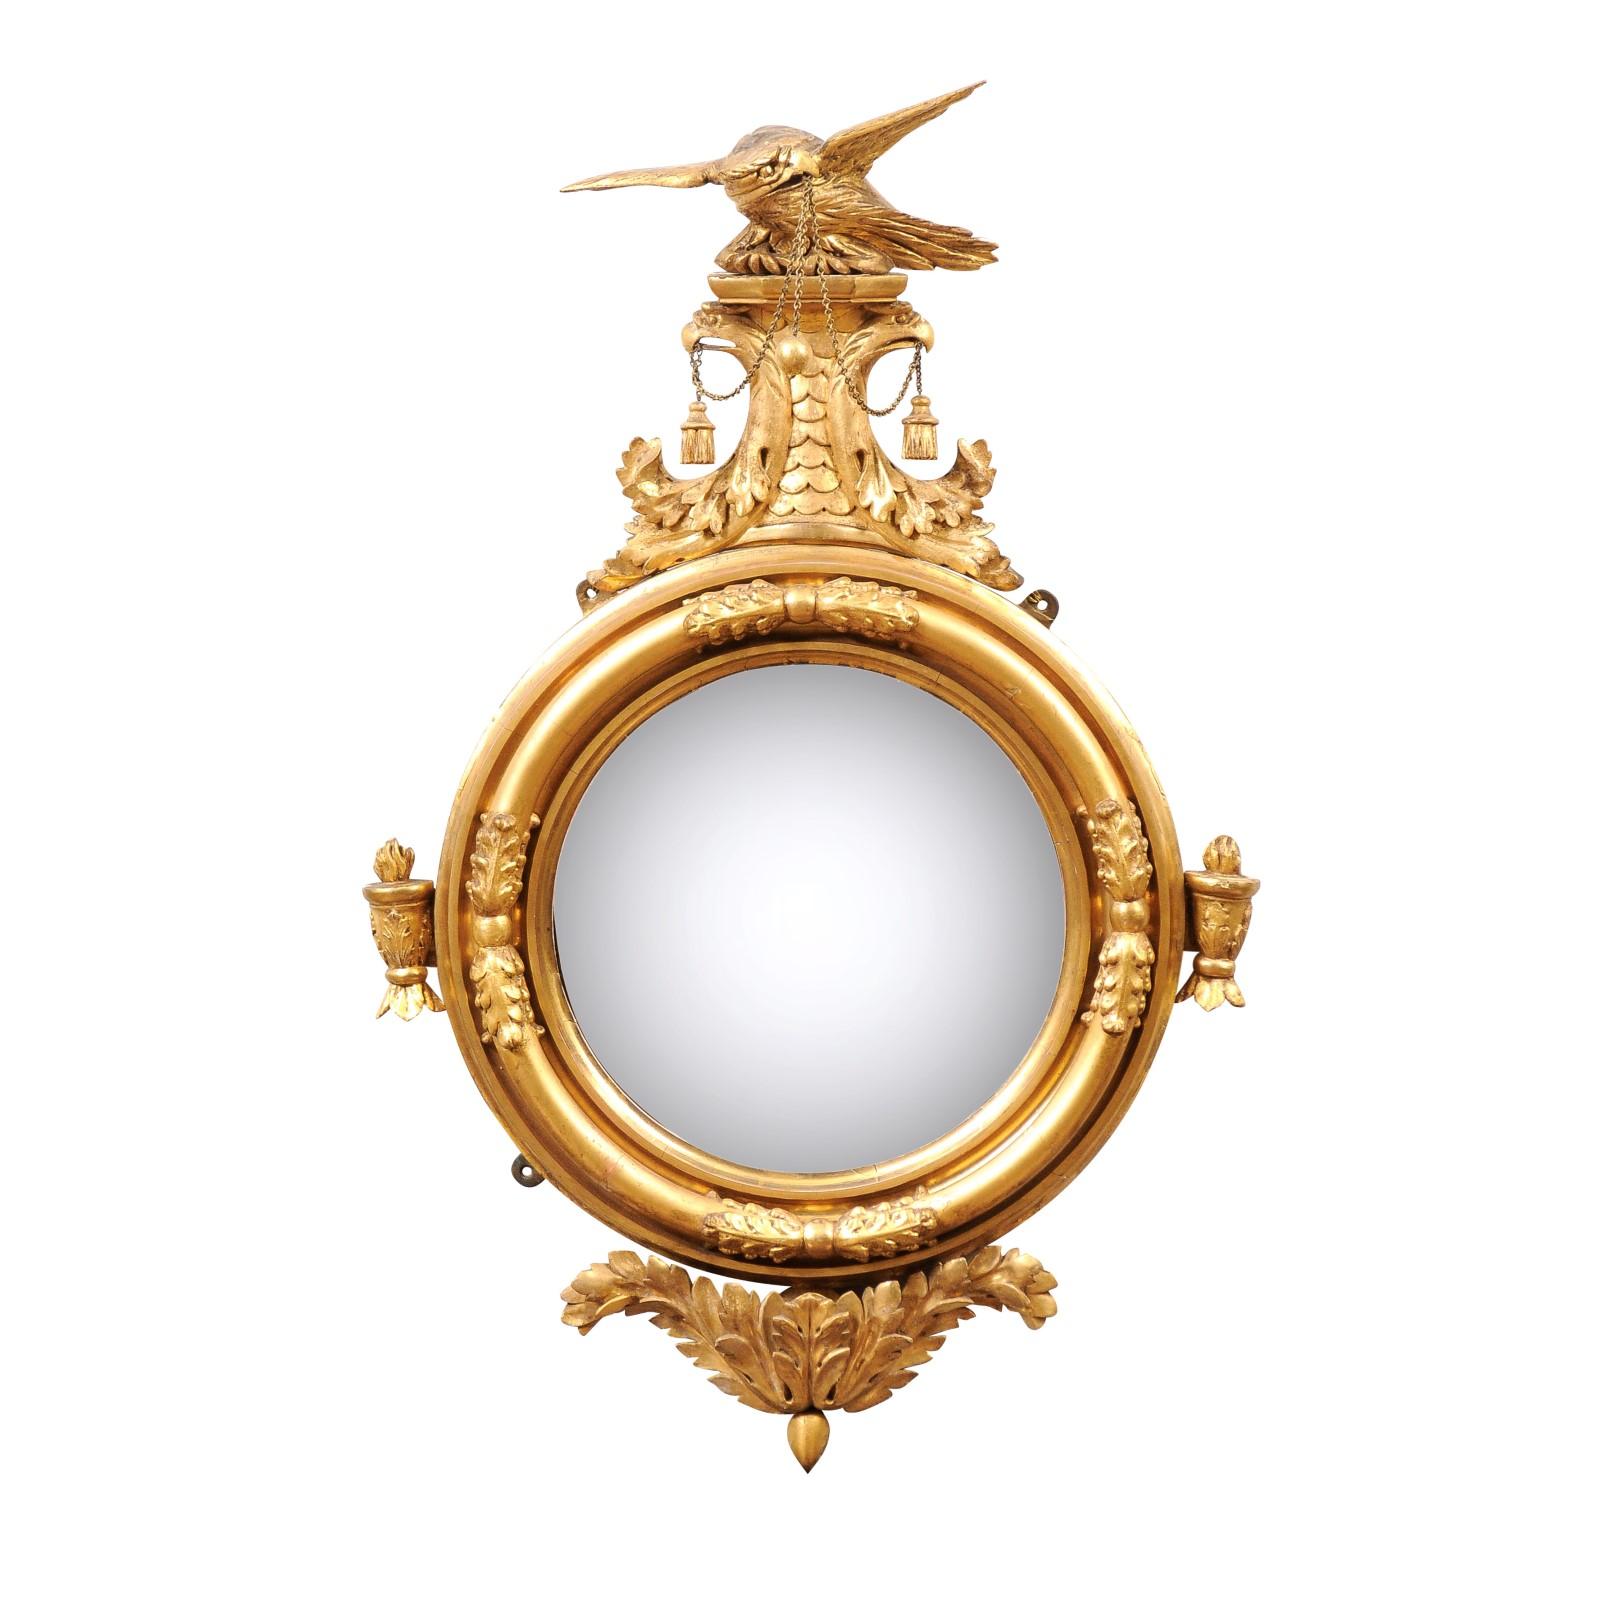 English Regency 19th Century Bull’s Eye Mirror with Eagle Crest and carved Acanthus Leaf Detail